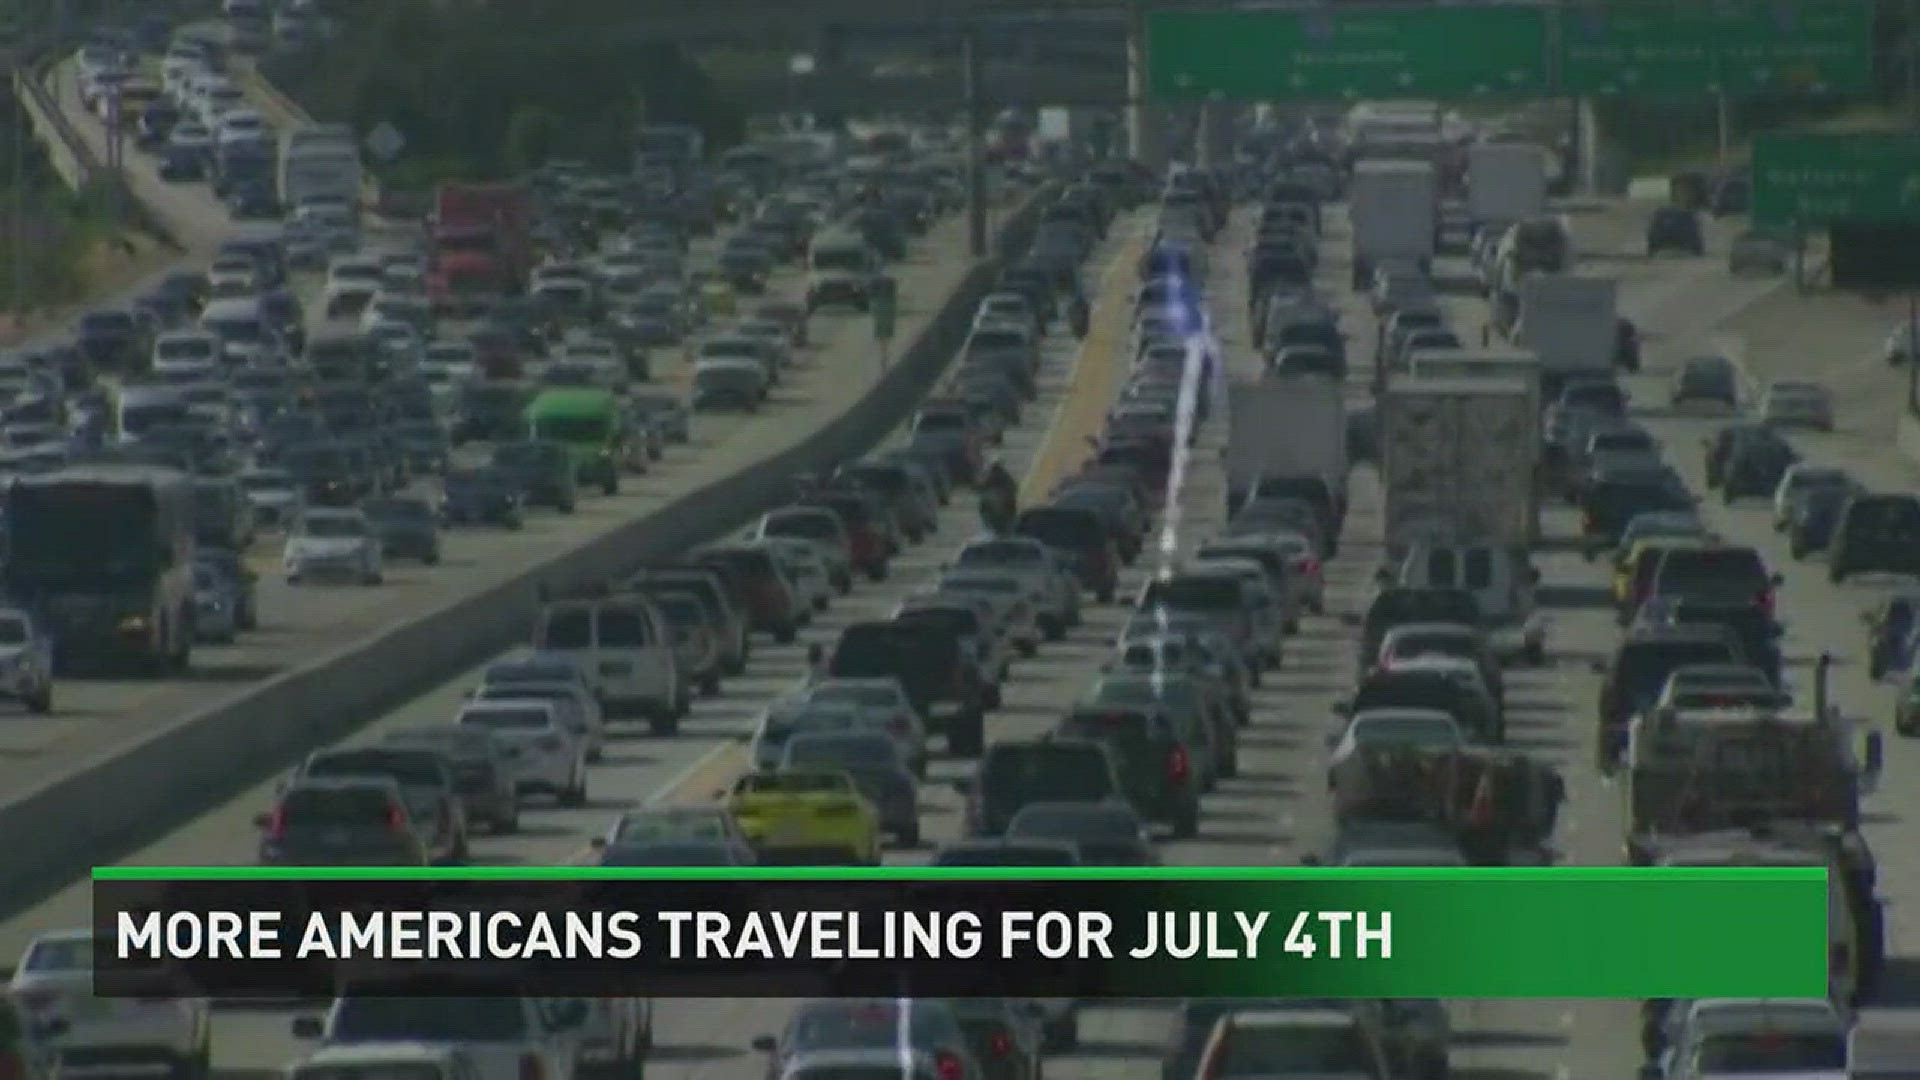 It seems that more Americans will travel this Fourth of July than ever before.